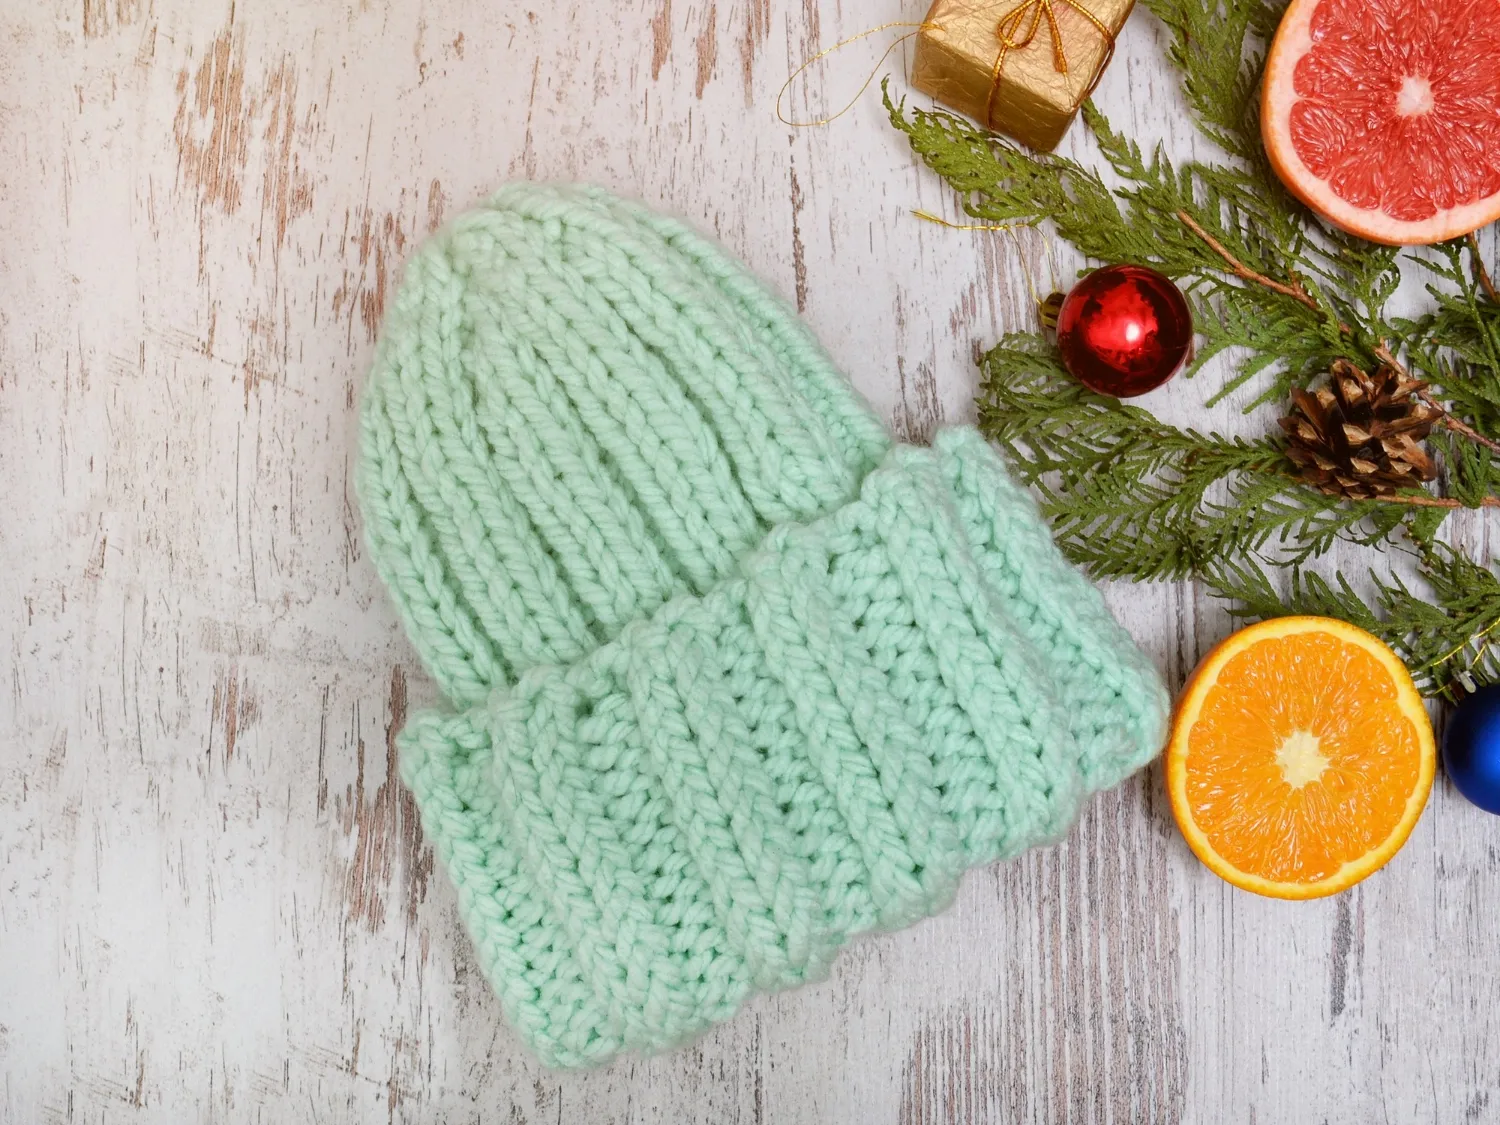 Green hat, citrus fruits and christmas tree decorations